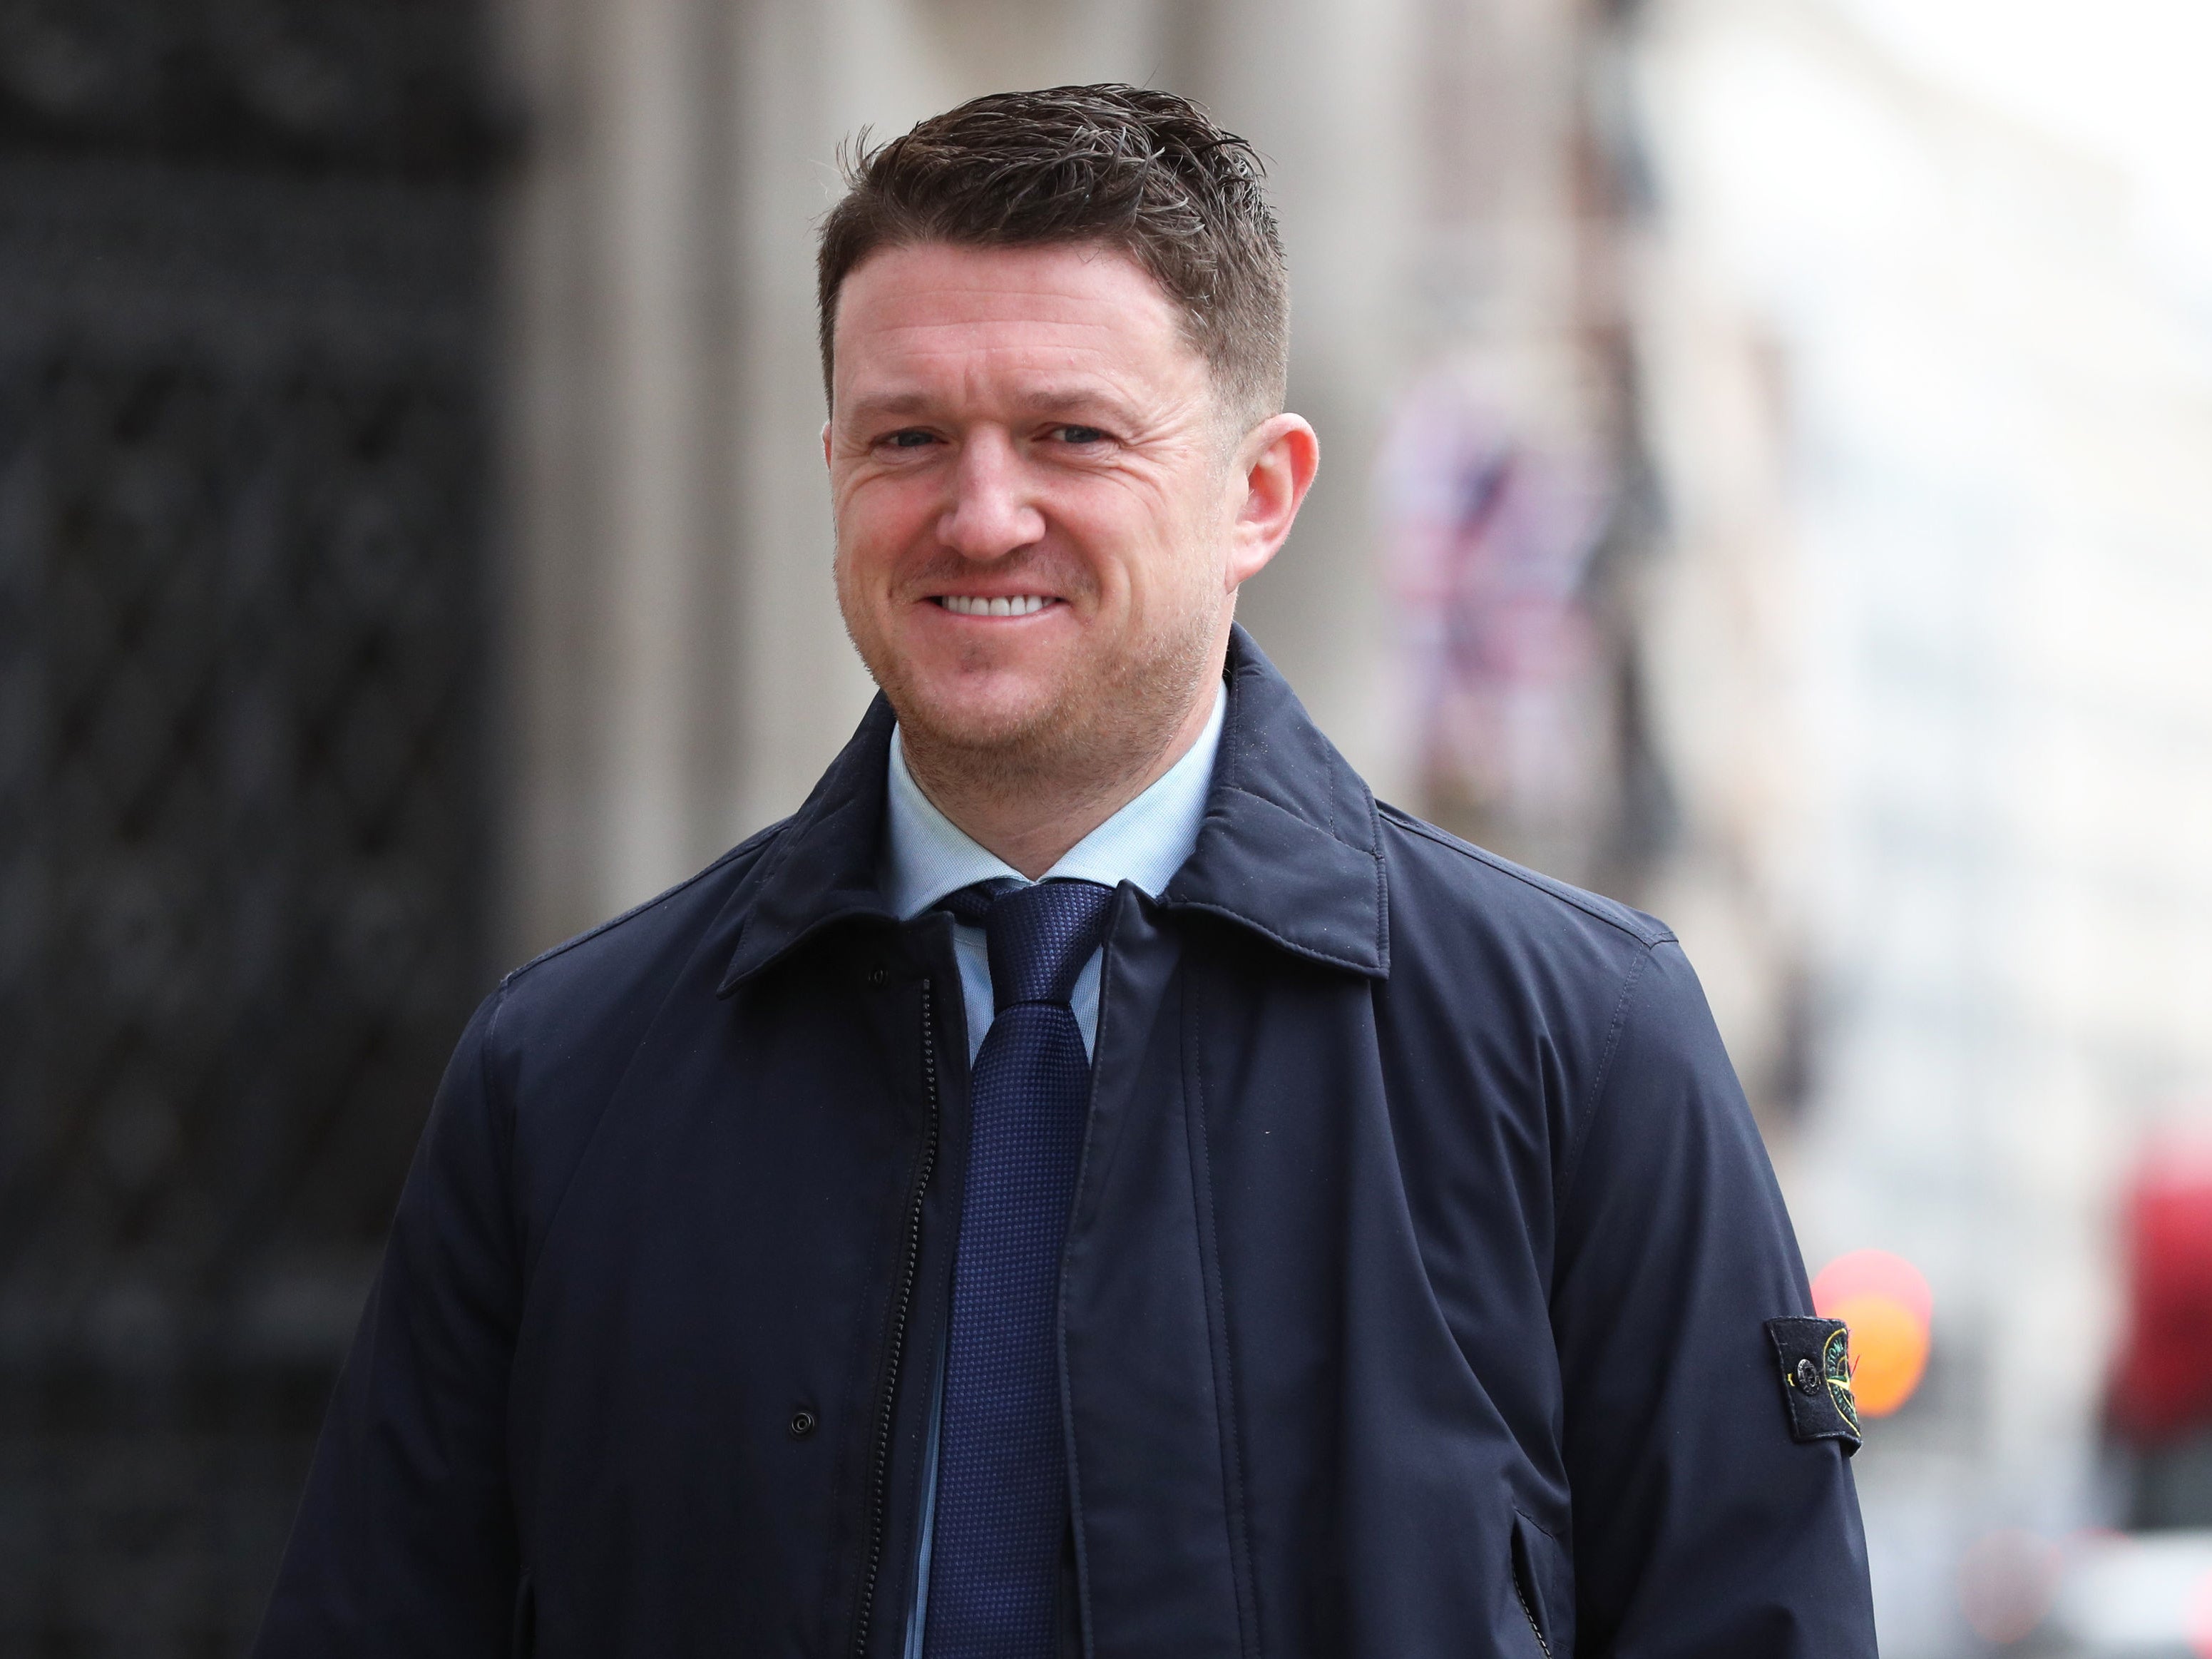 Tommy Robinson was not legally represented for the preliminary hearing at the High Court